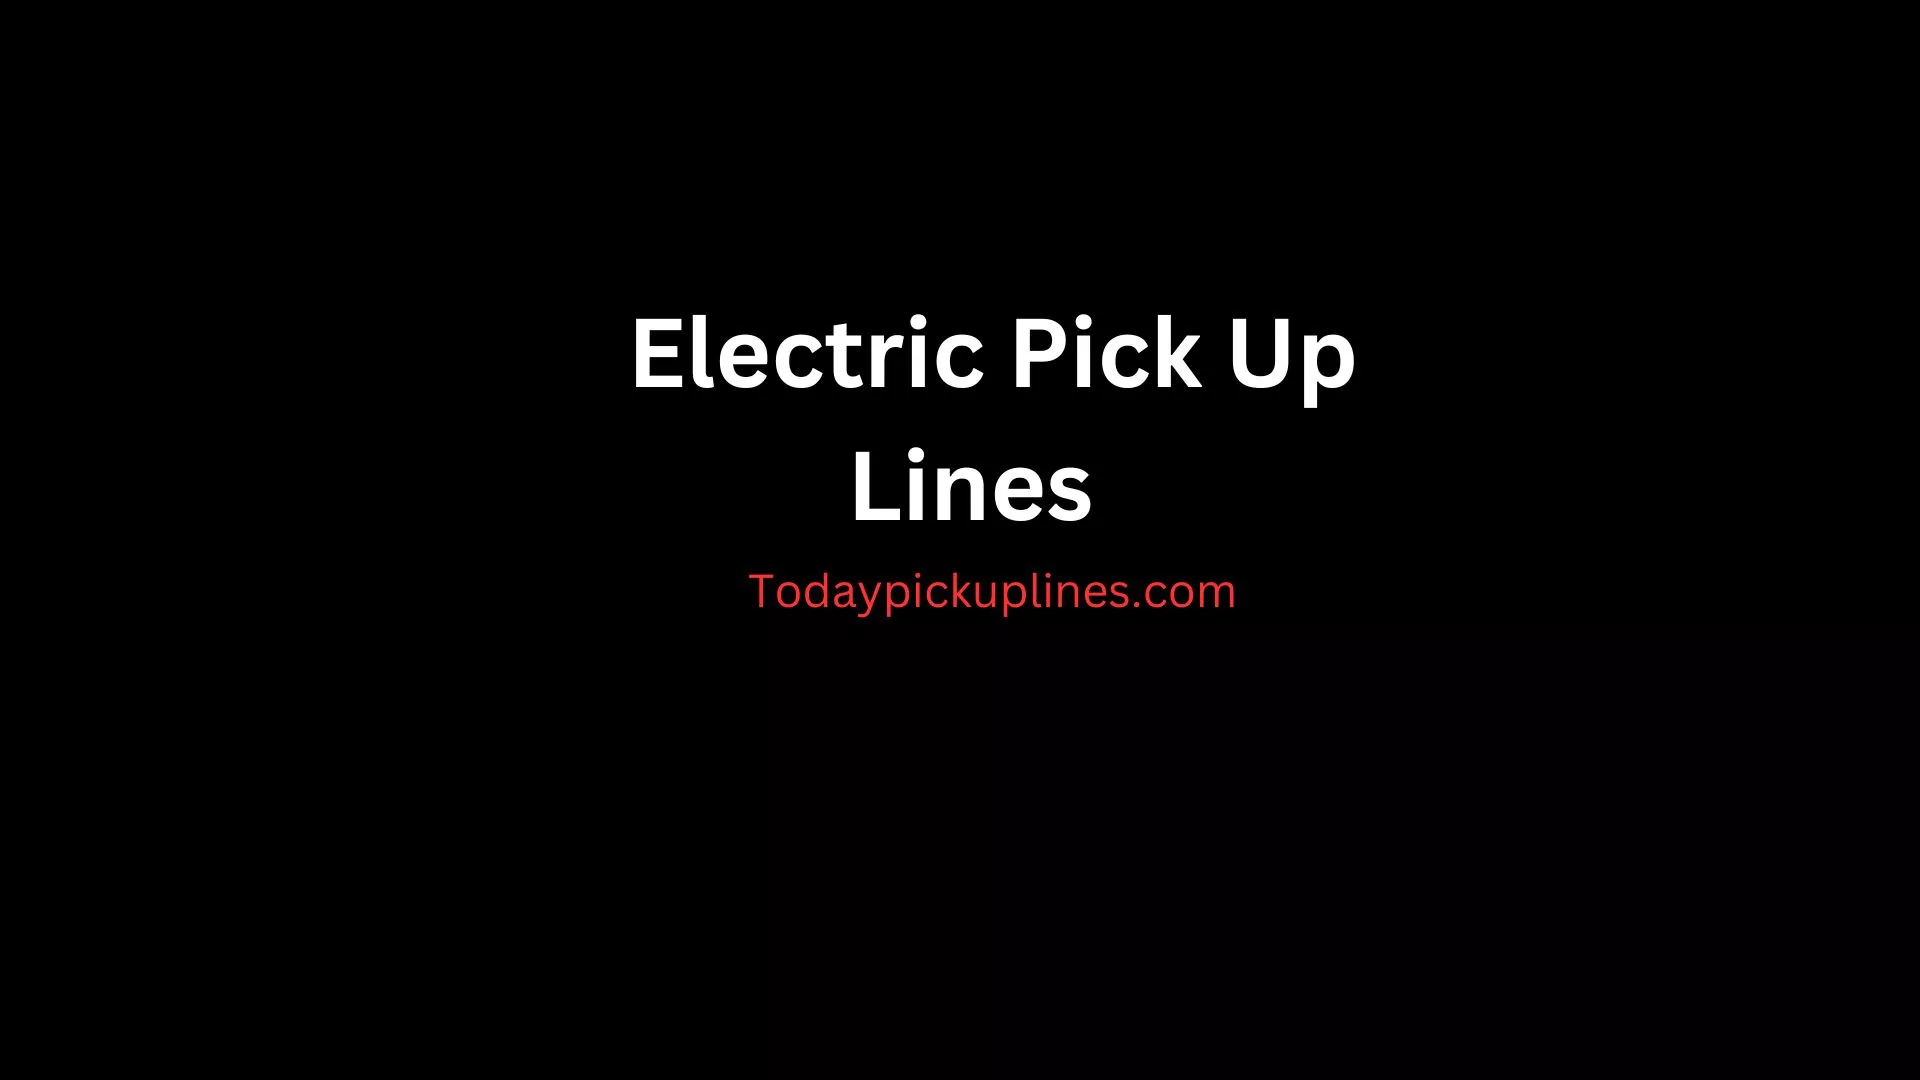 Electric Pick Up Lines